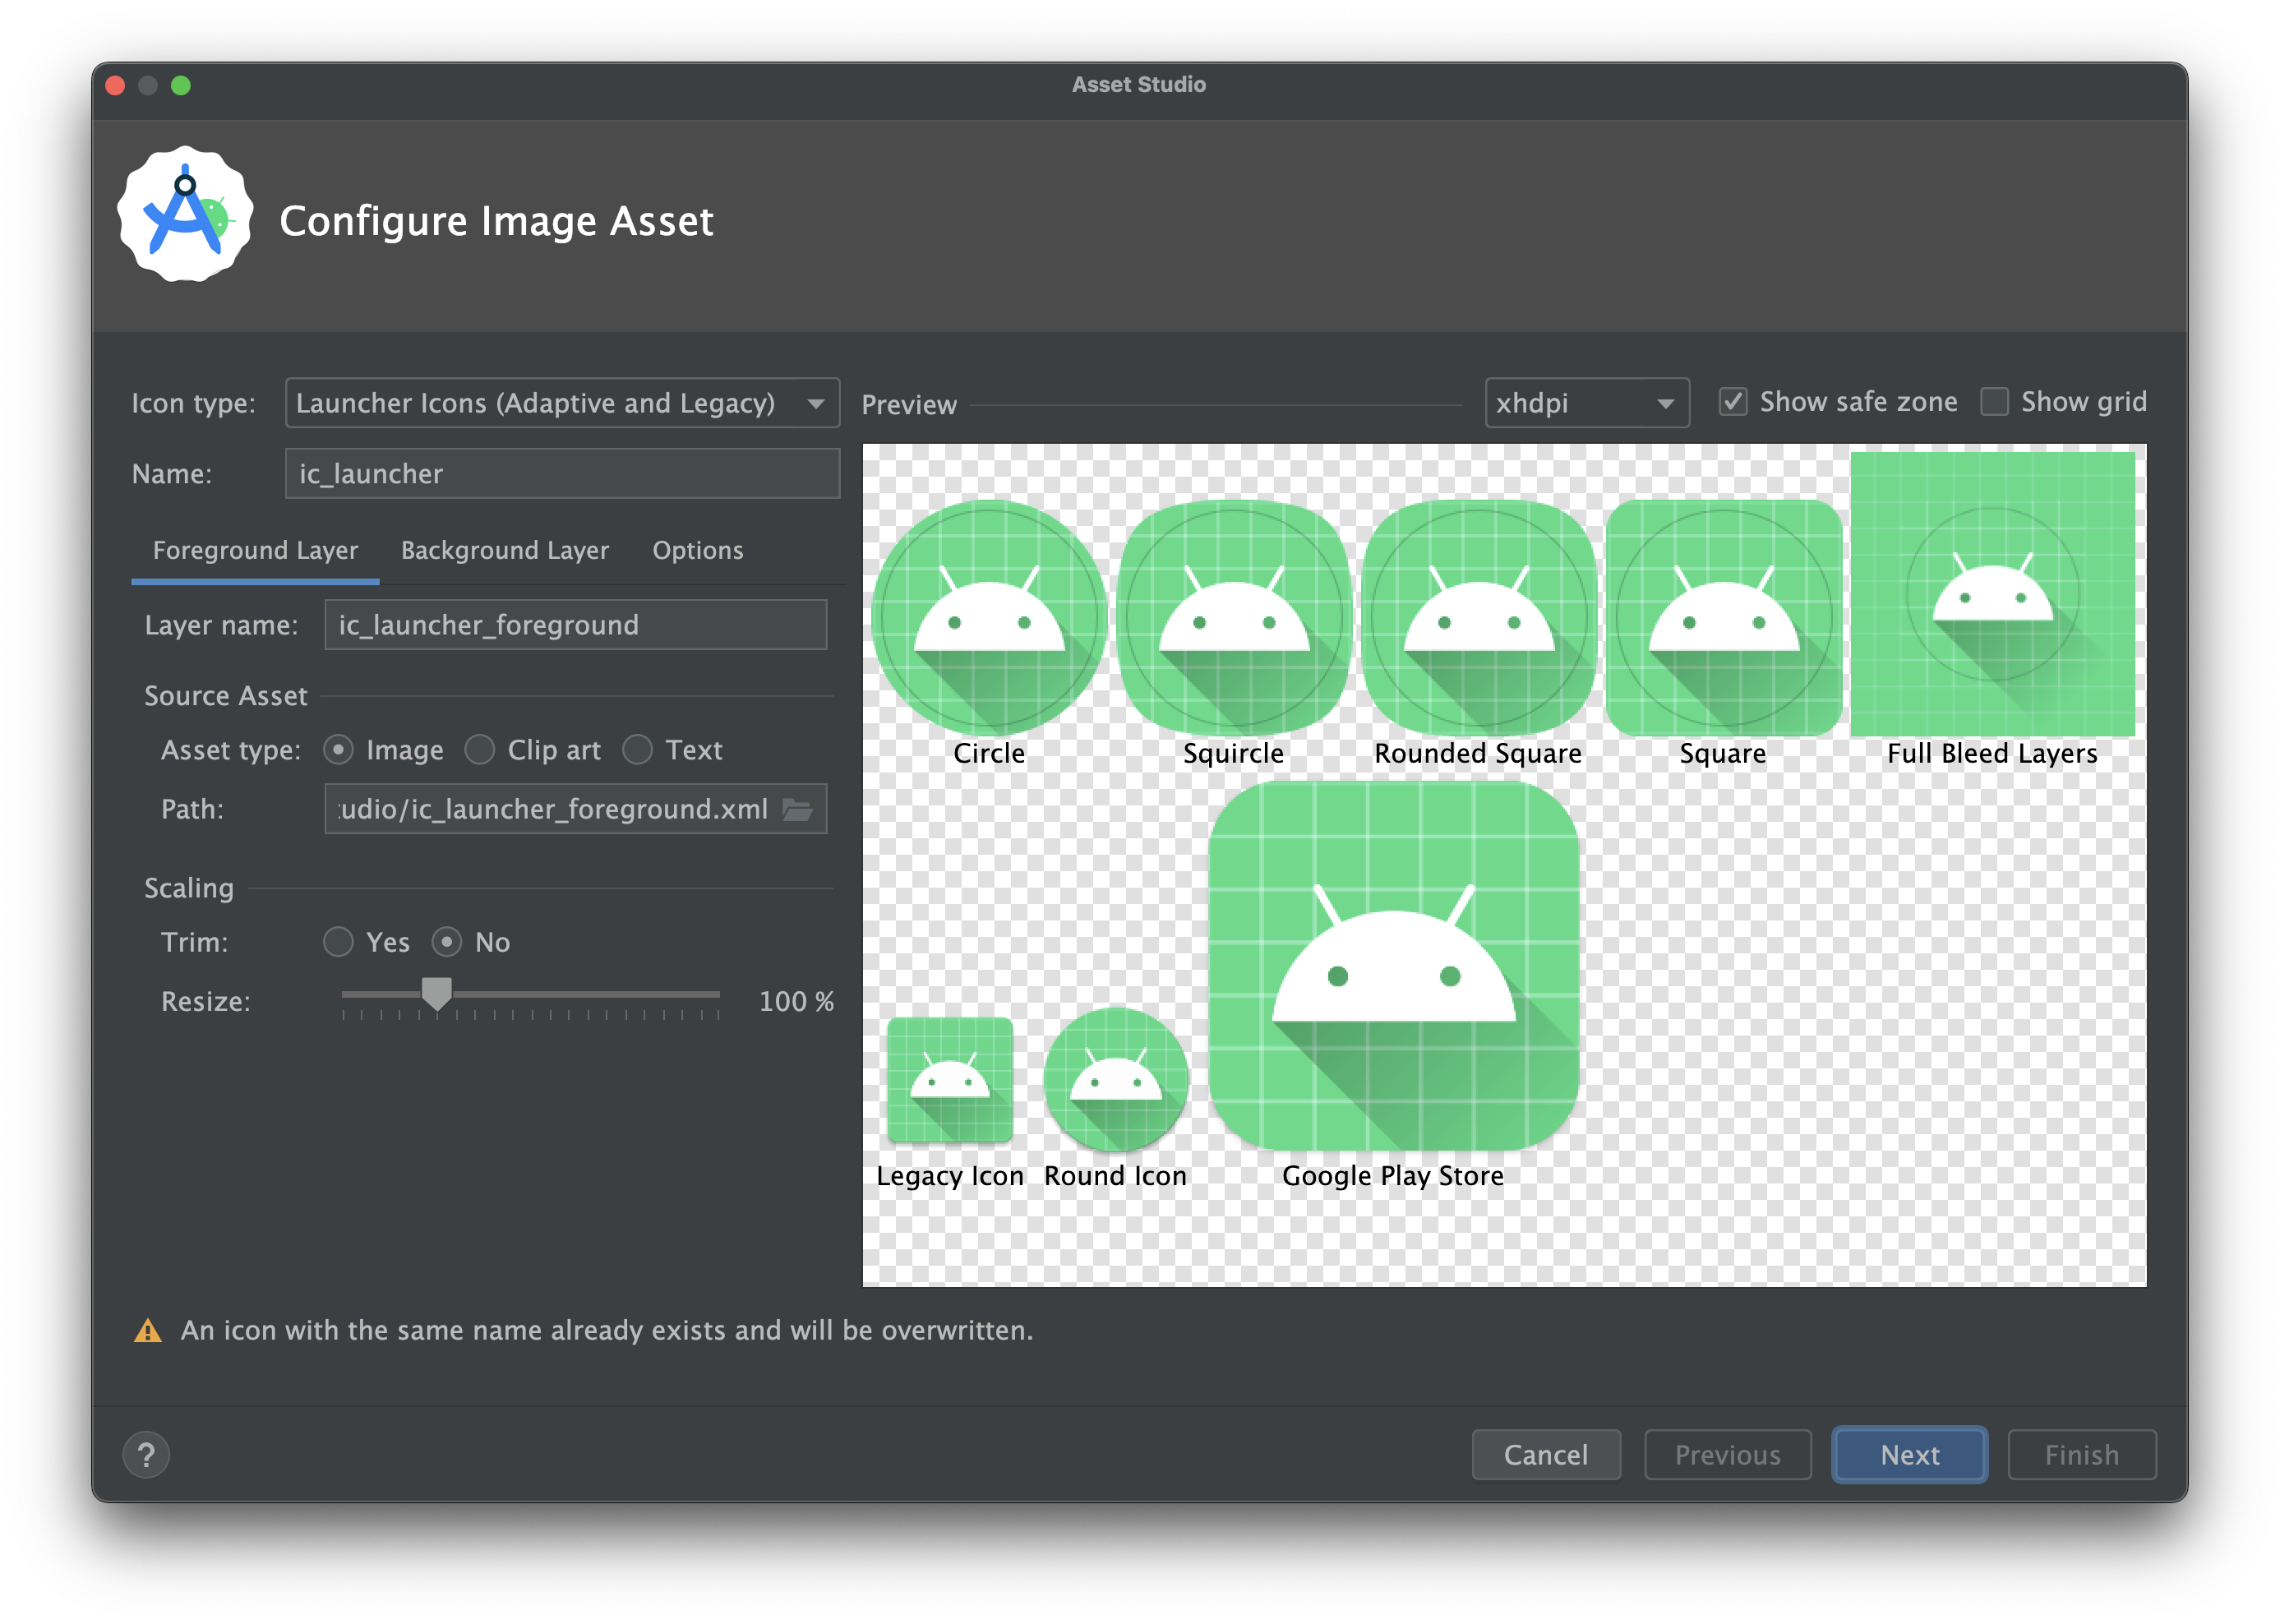 The adaptive and legacy icon wizard in Image Asset Studio.